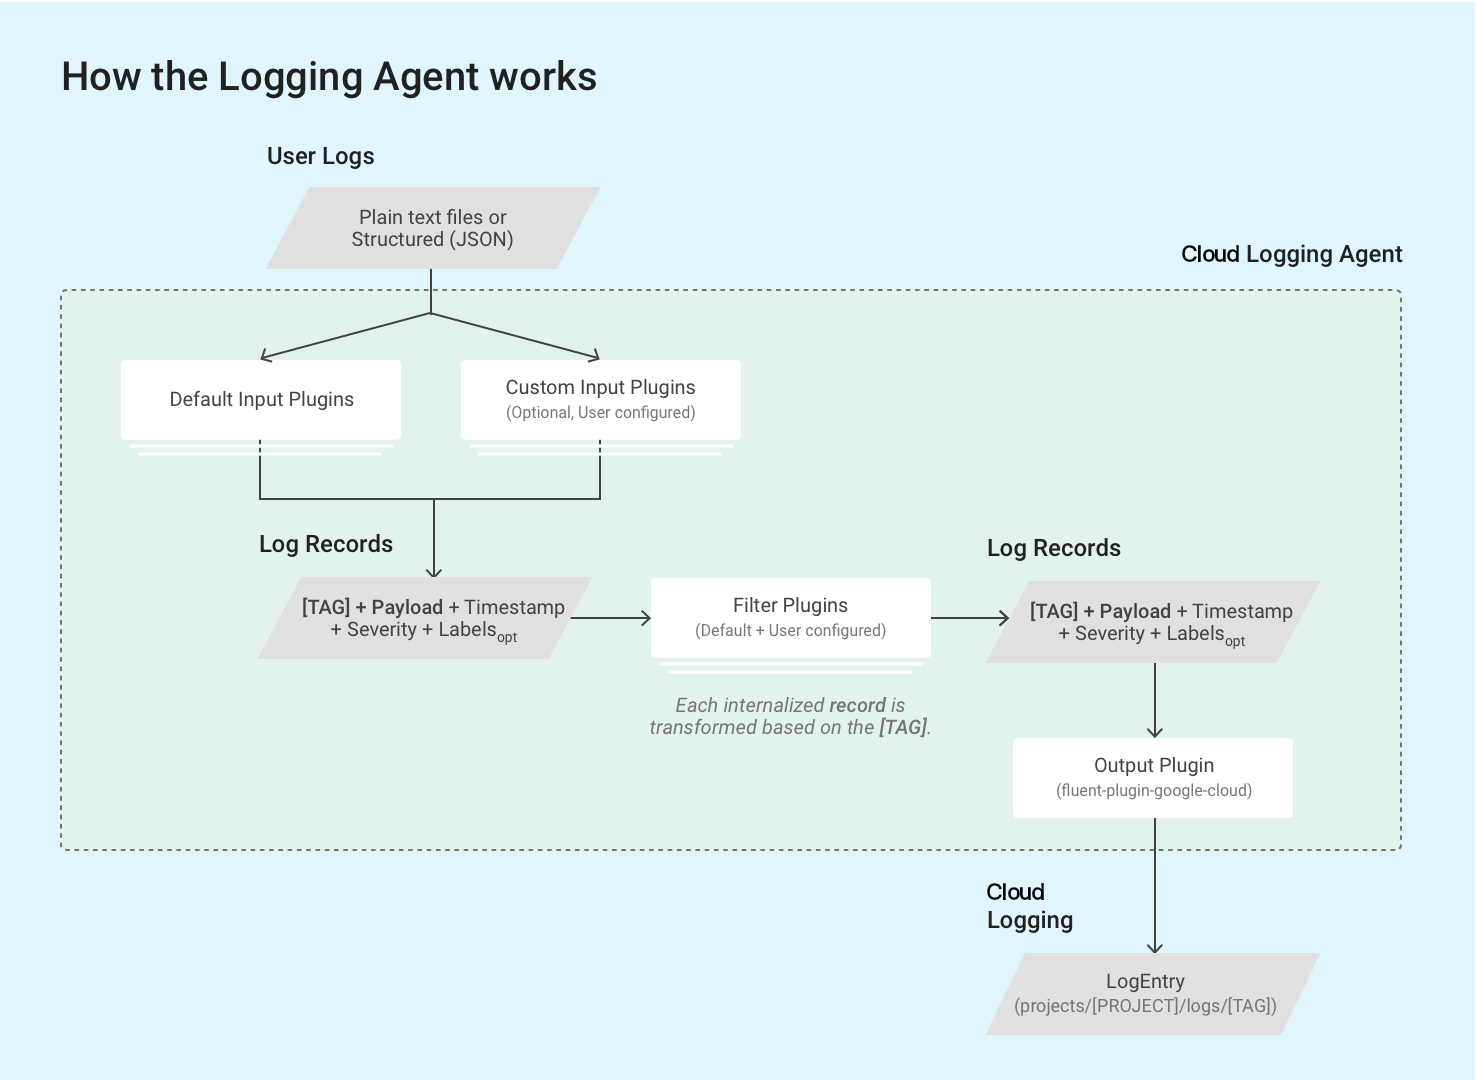 How the Logging Agent Works.